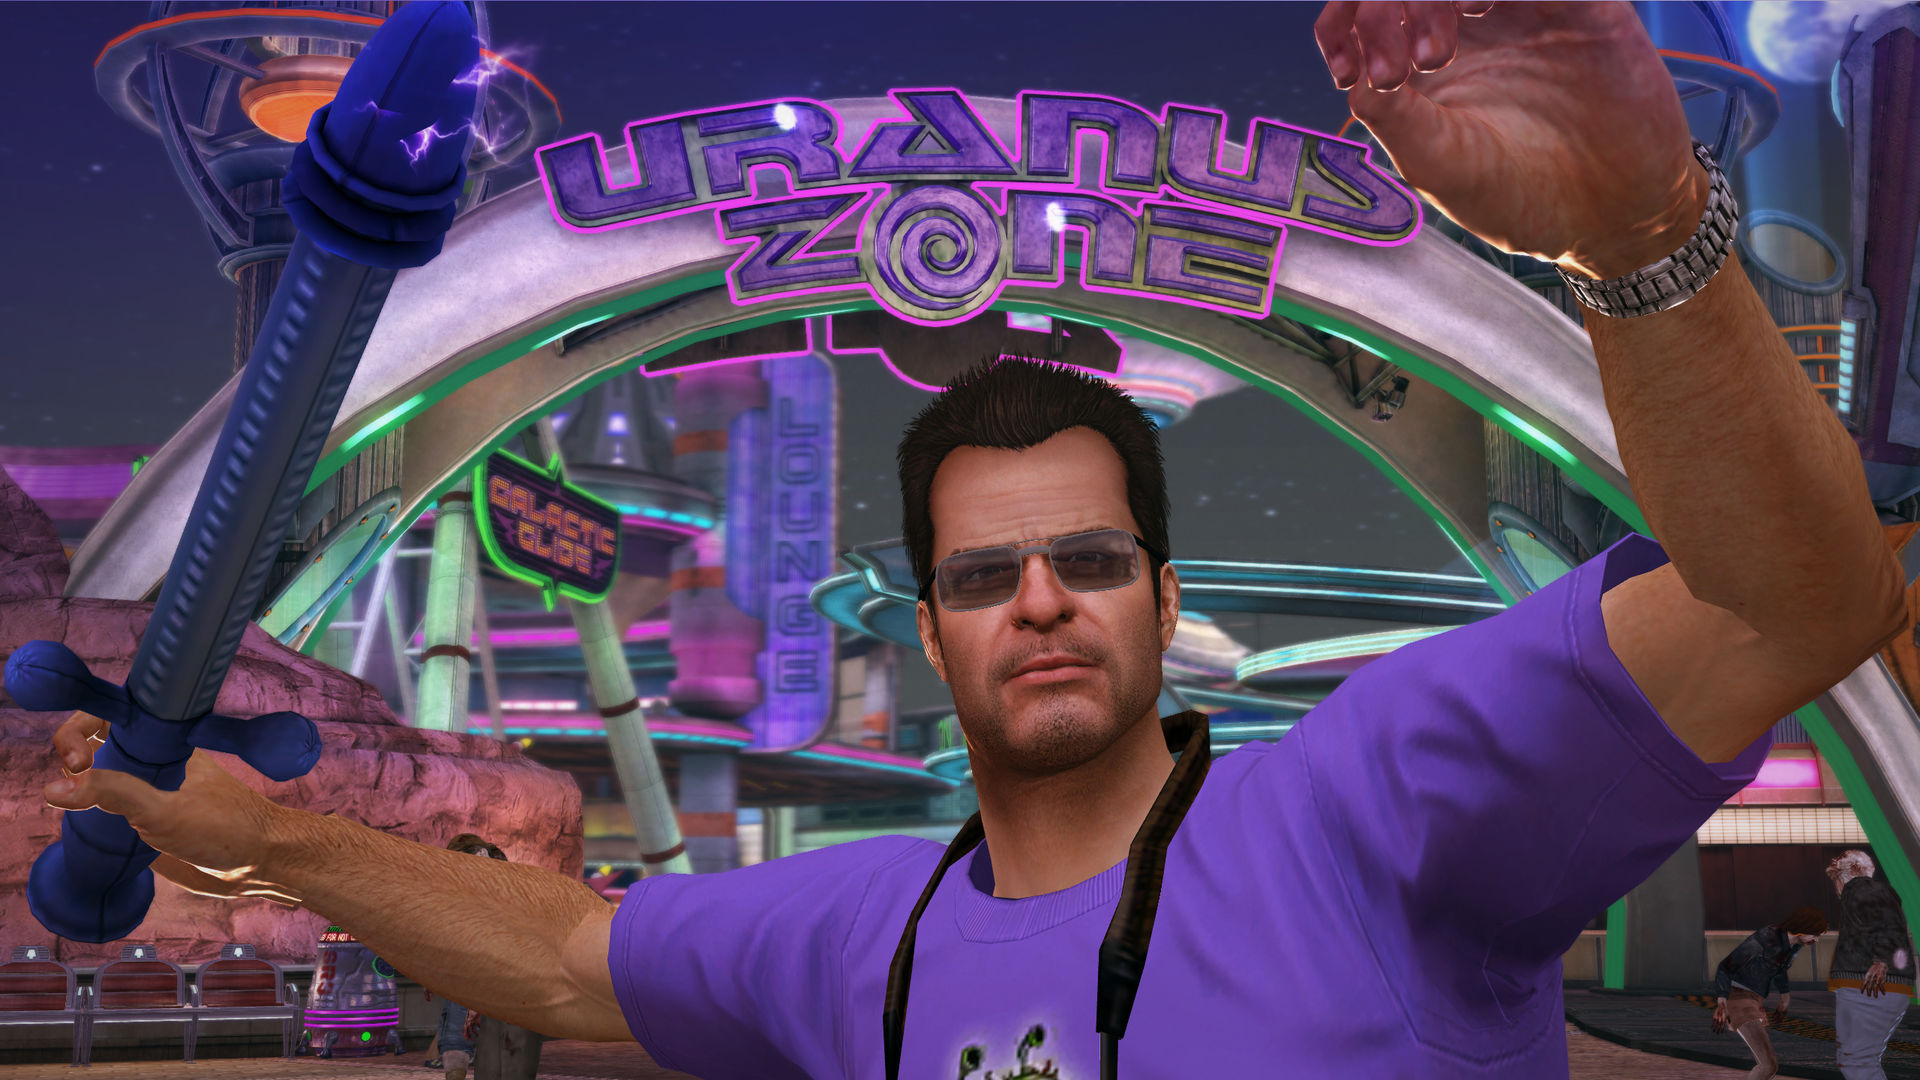 Dead Rising 2 Off the Record  Frank West comes to Fortune City